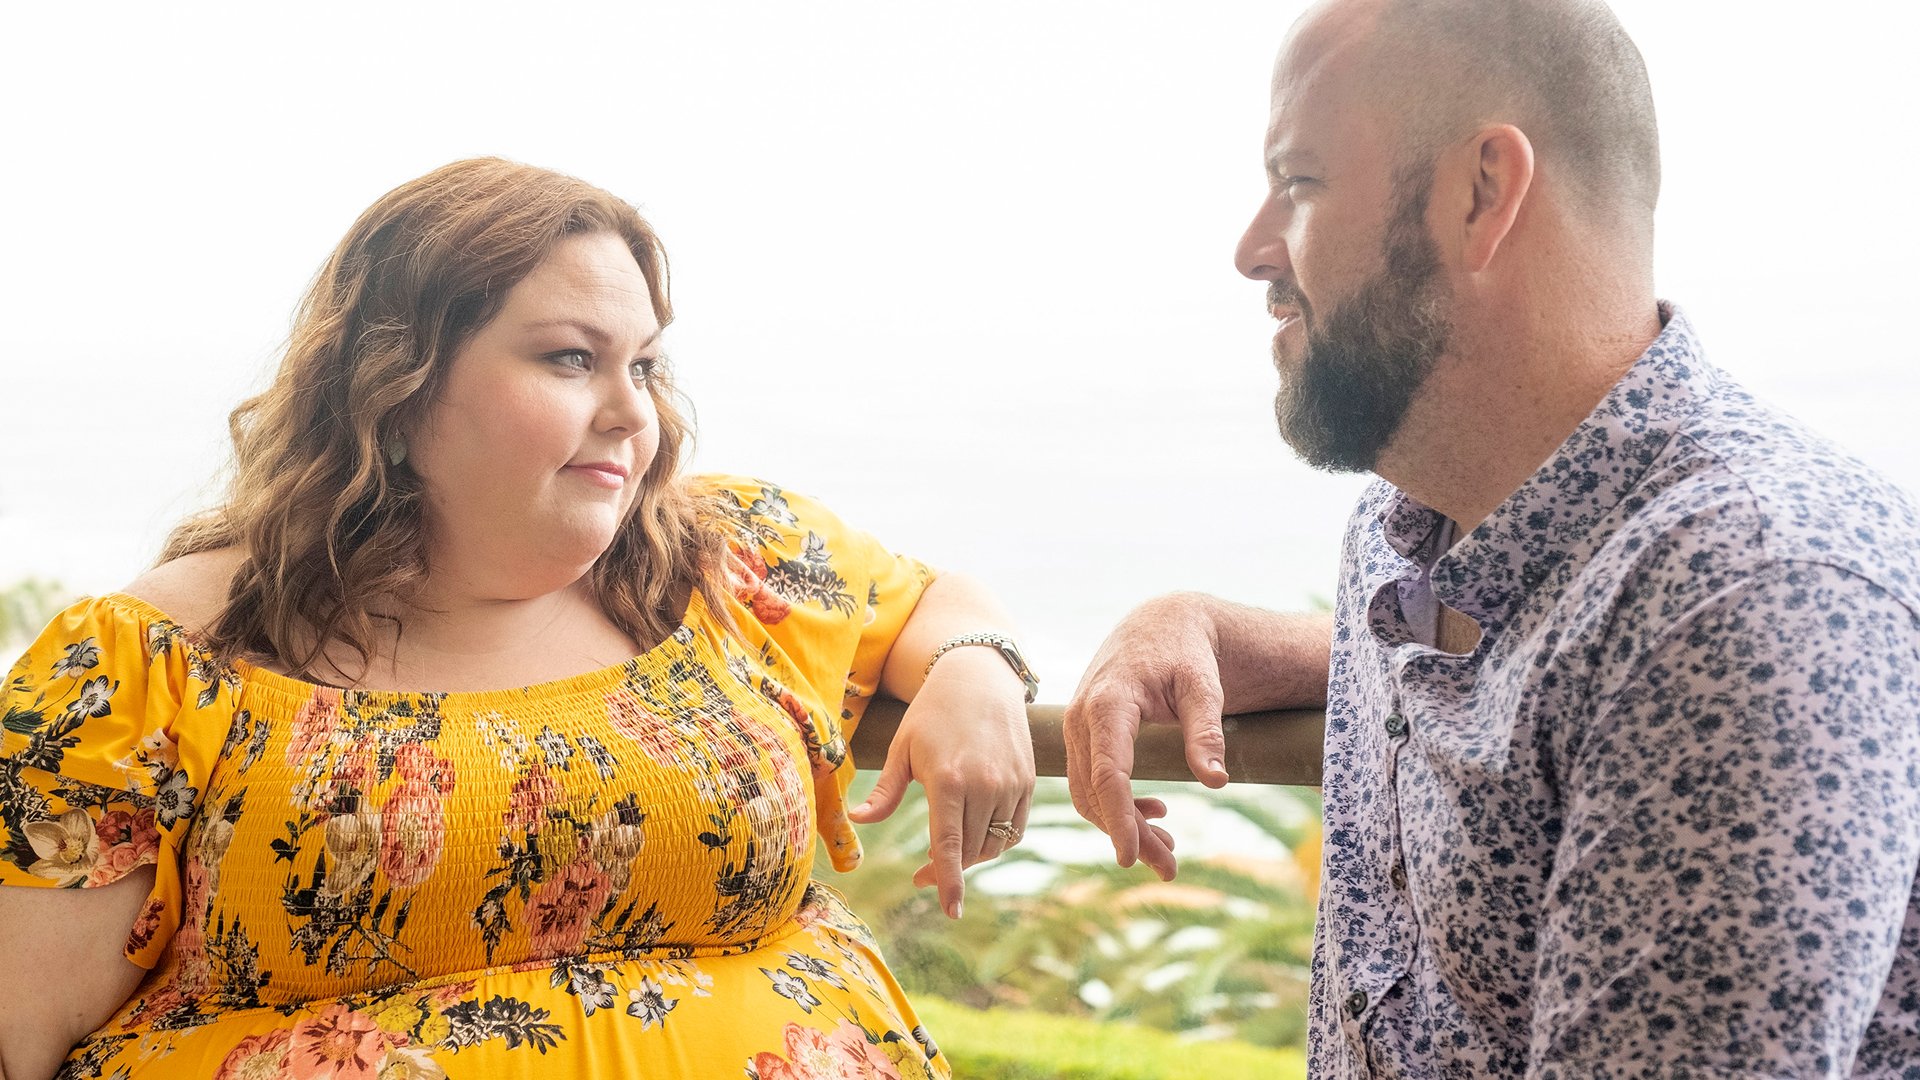 Chrissy Metz as Kate and Chris Sullivan as Toby talking in the finale, ‘This Is Us’ Season 5 Episode 16